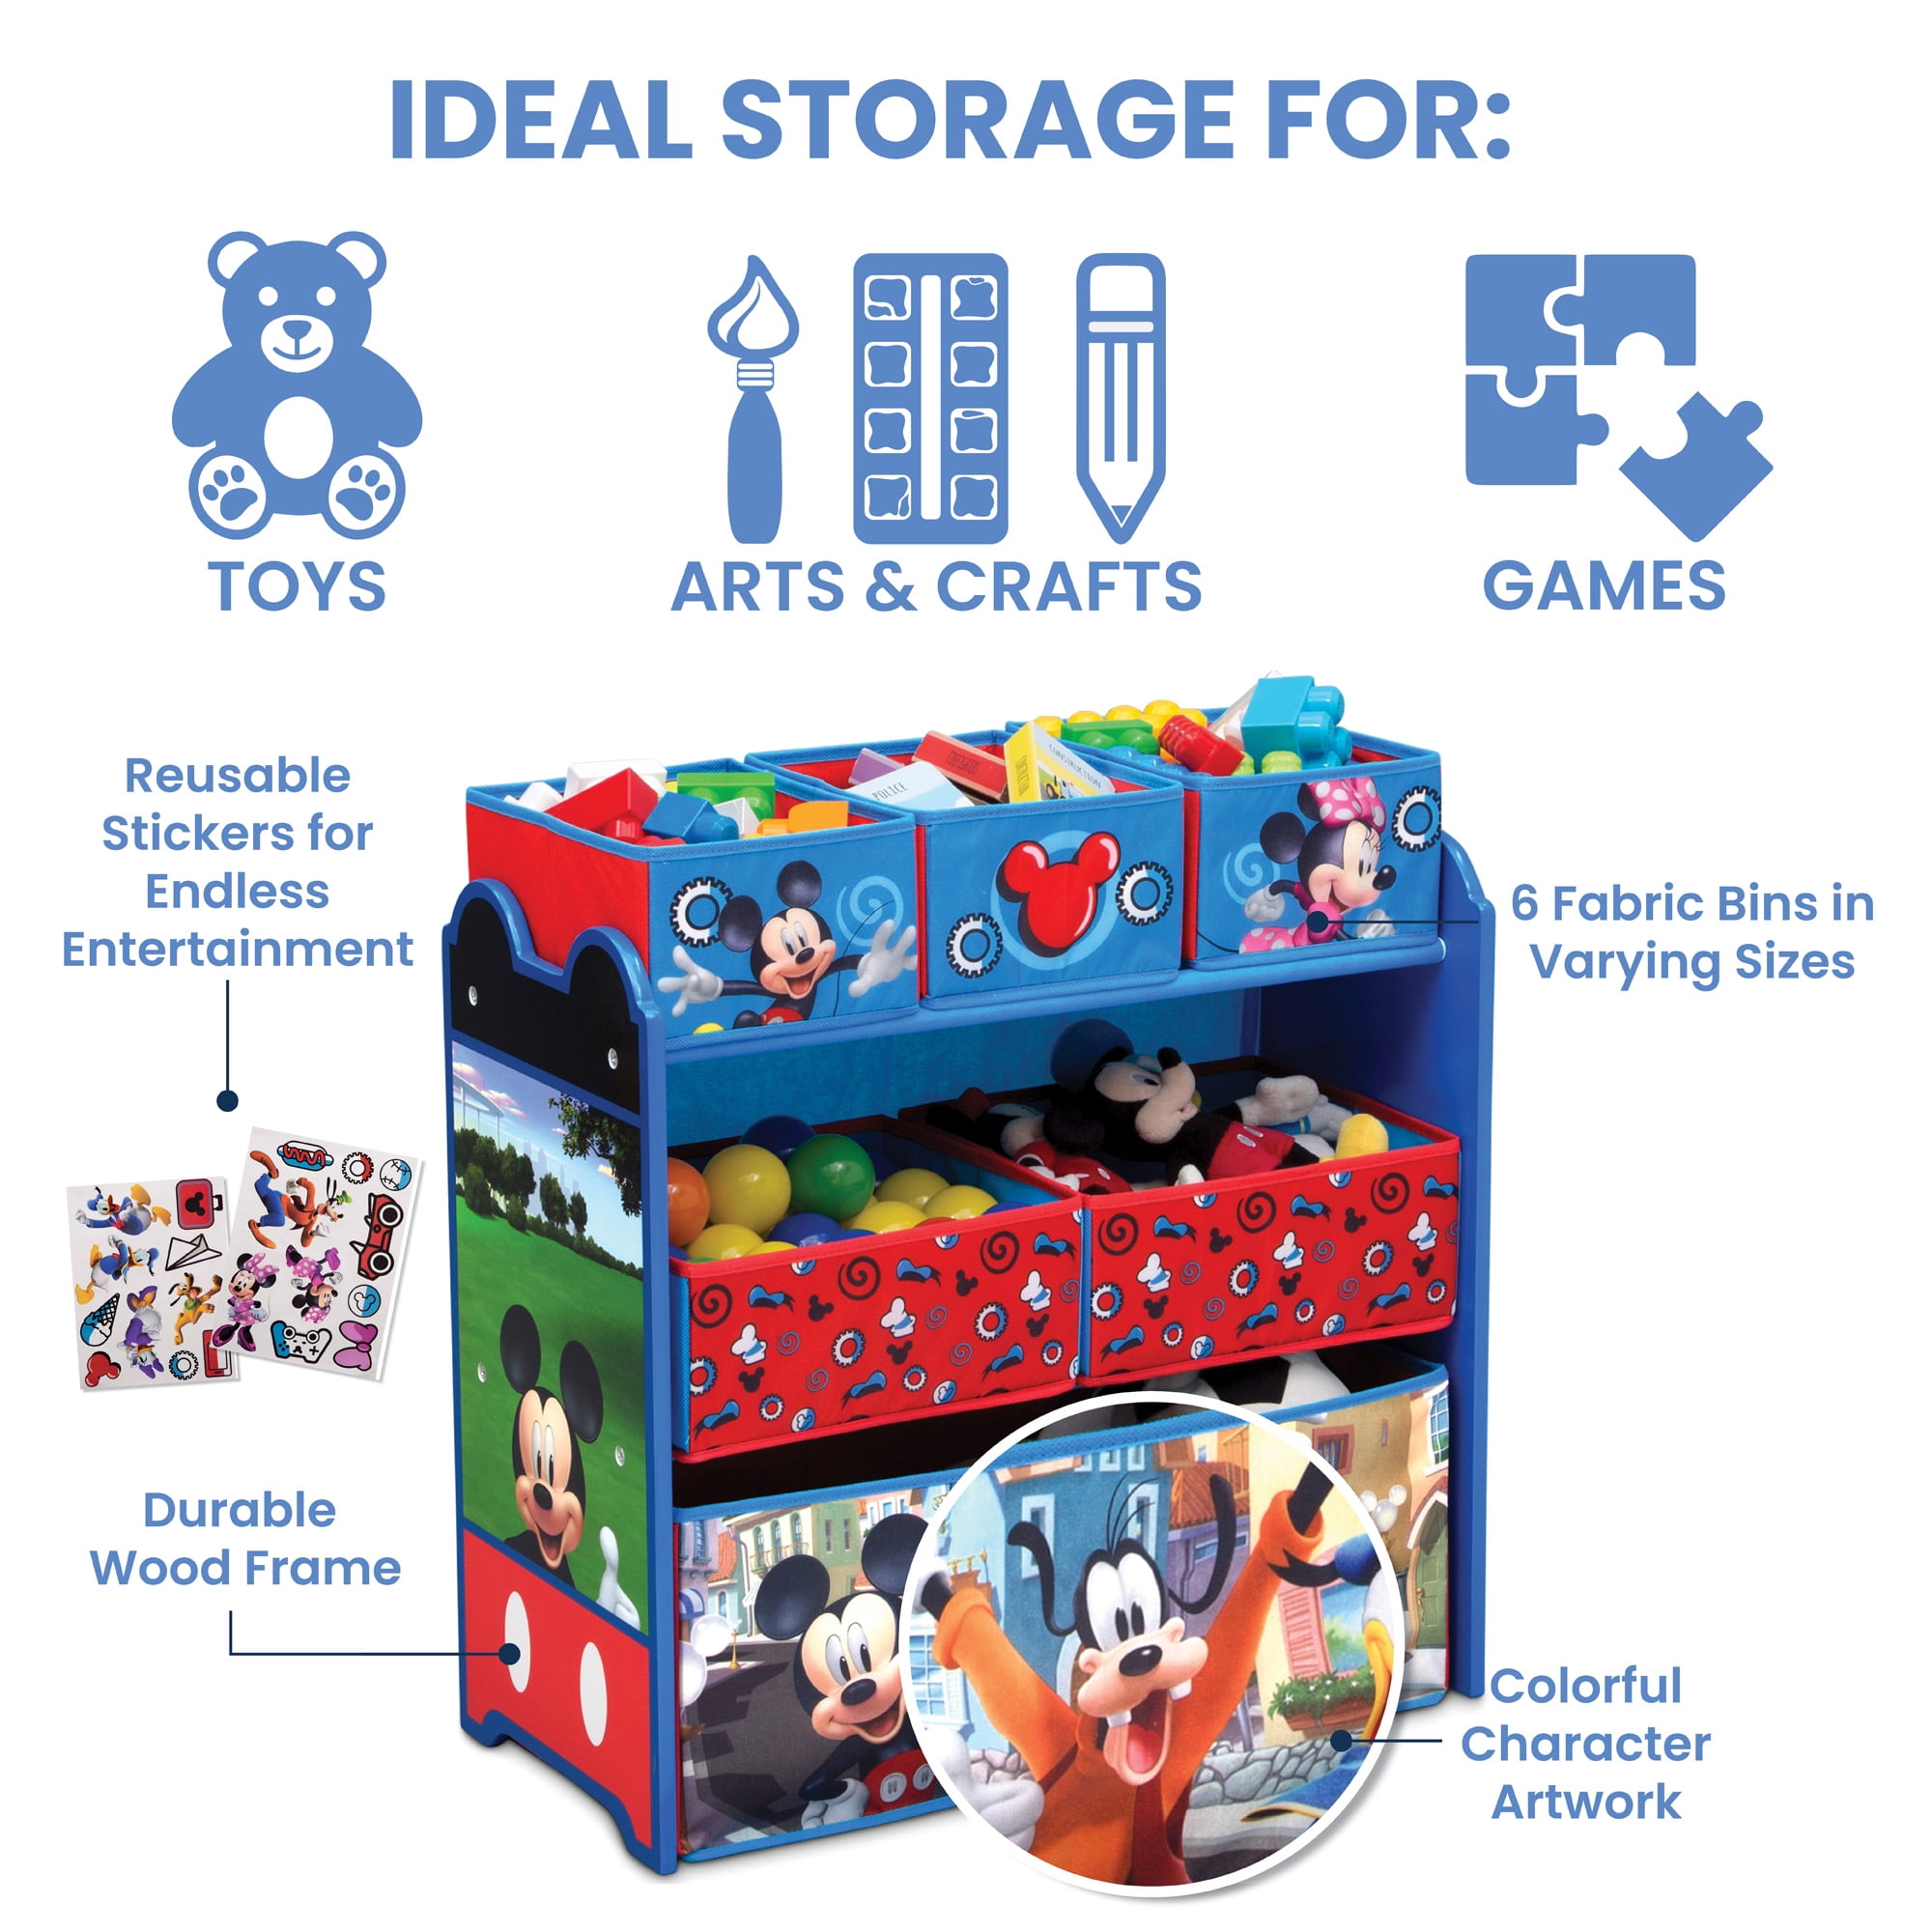 Details about   Mickey Mouse Blue Red Toy Box Organizer Storage Chest Bins Kids Playroom Bedroom 